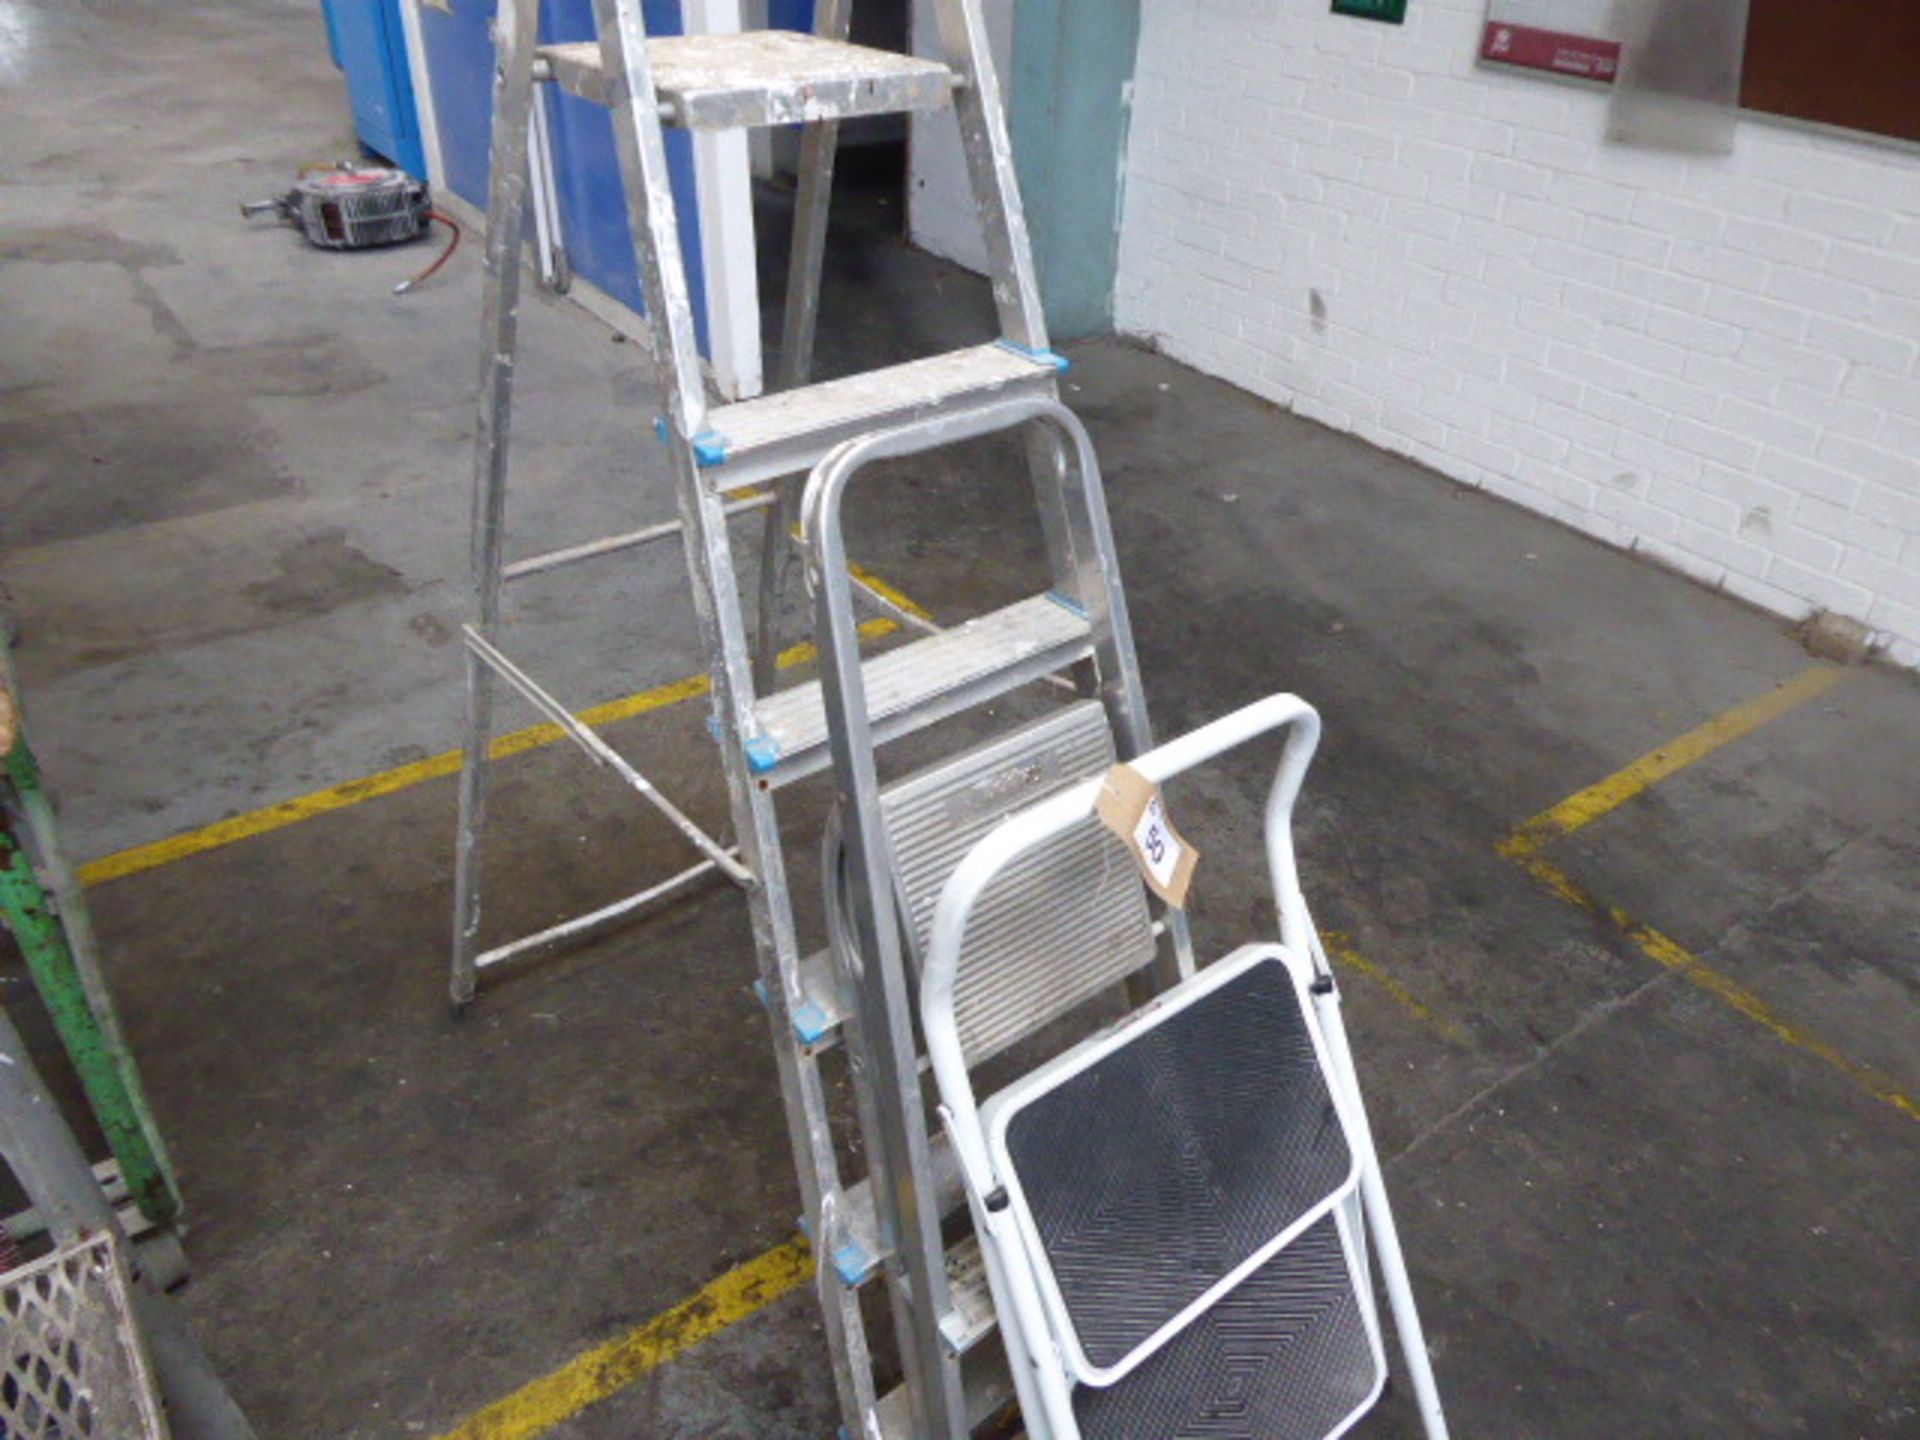 2 aluminum step ladders and 1 other white step ladder